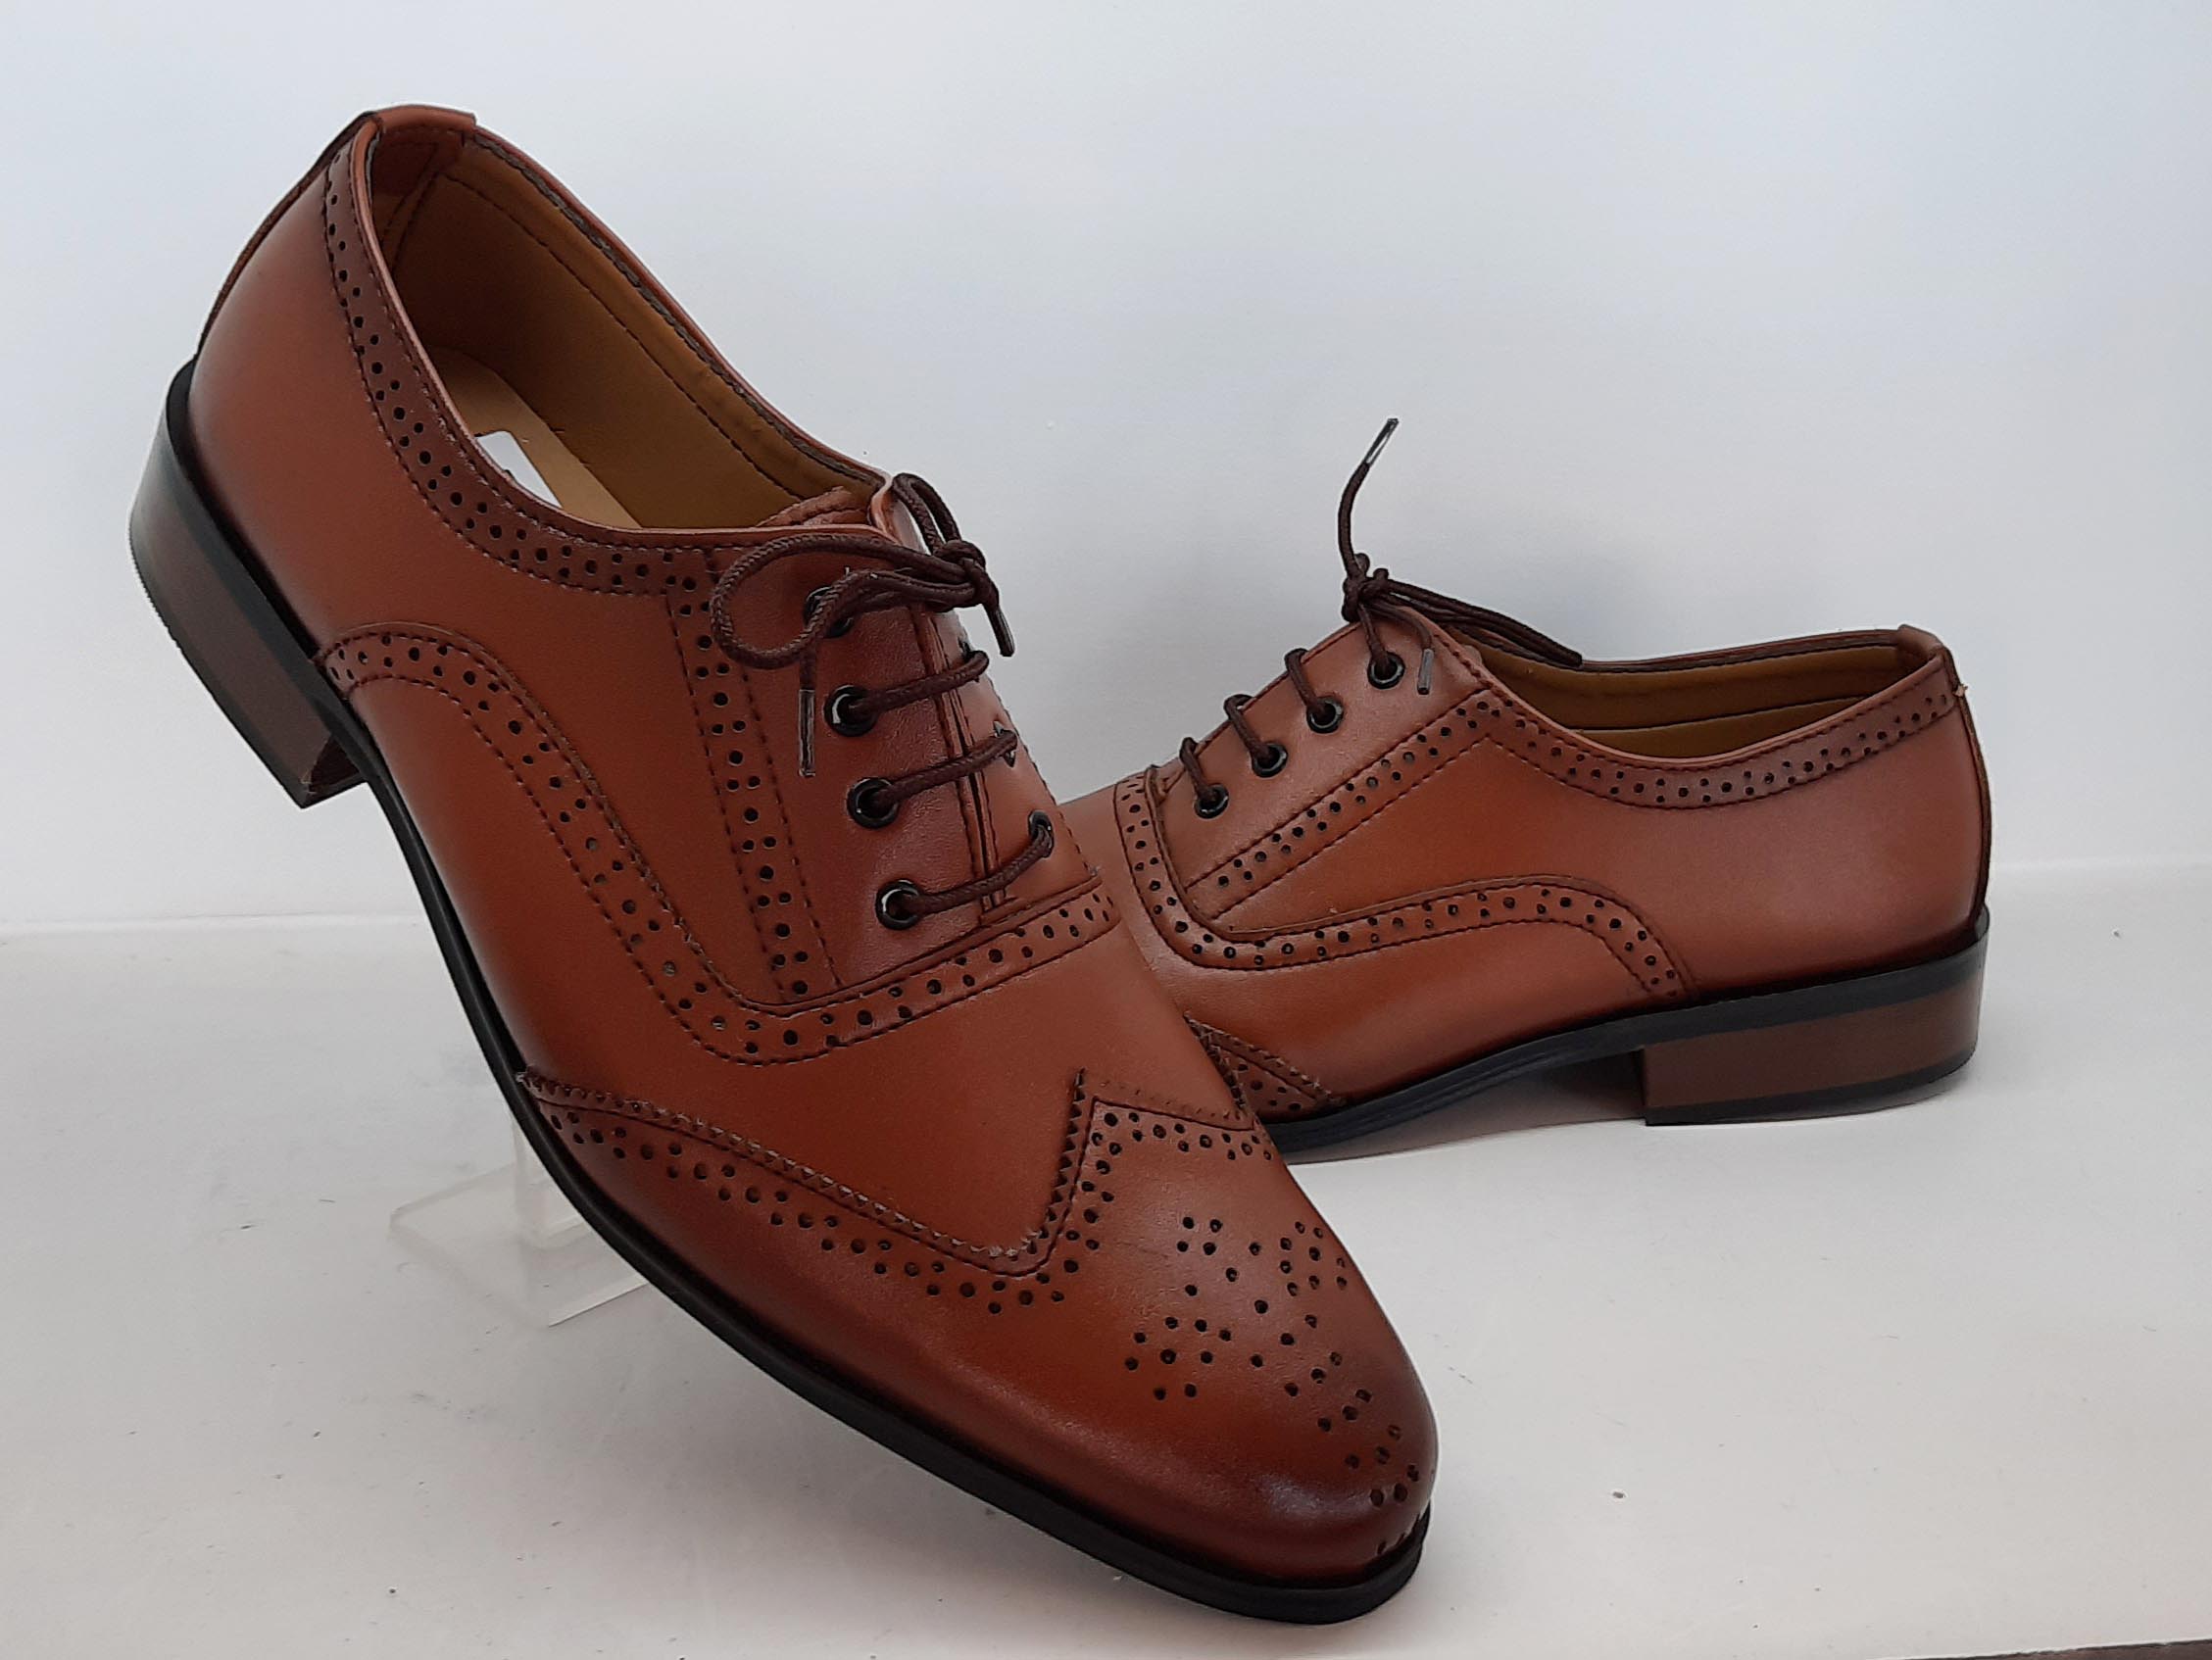 BRANDED LEATHER SHOES OXFORD STYLE: Buy 